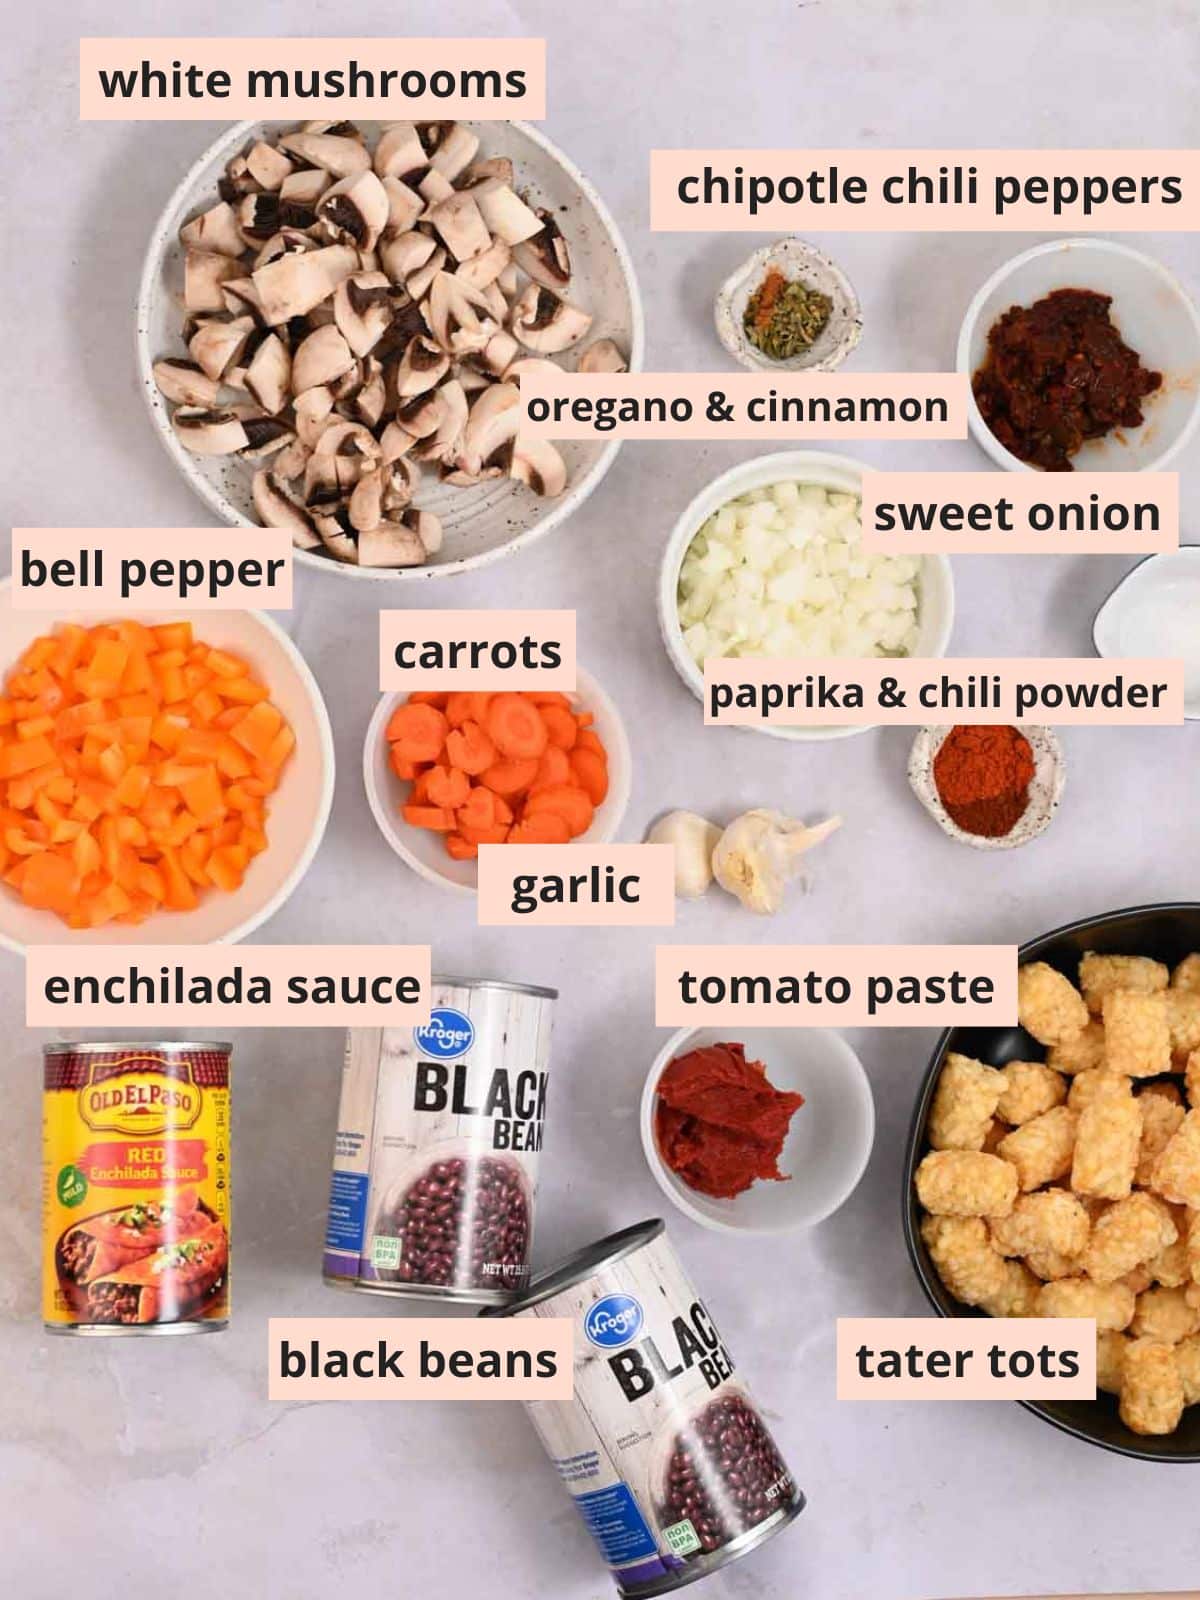 Labeled ingredients used to make tater tot casserole.